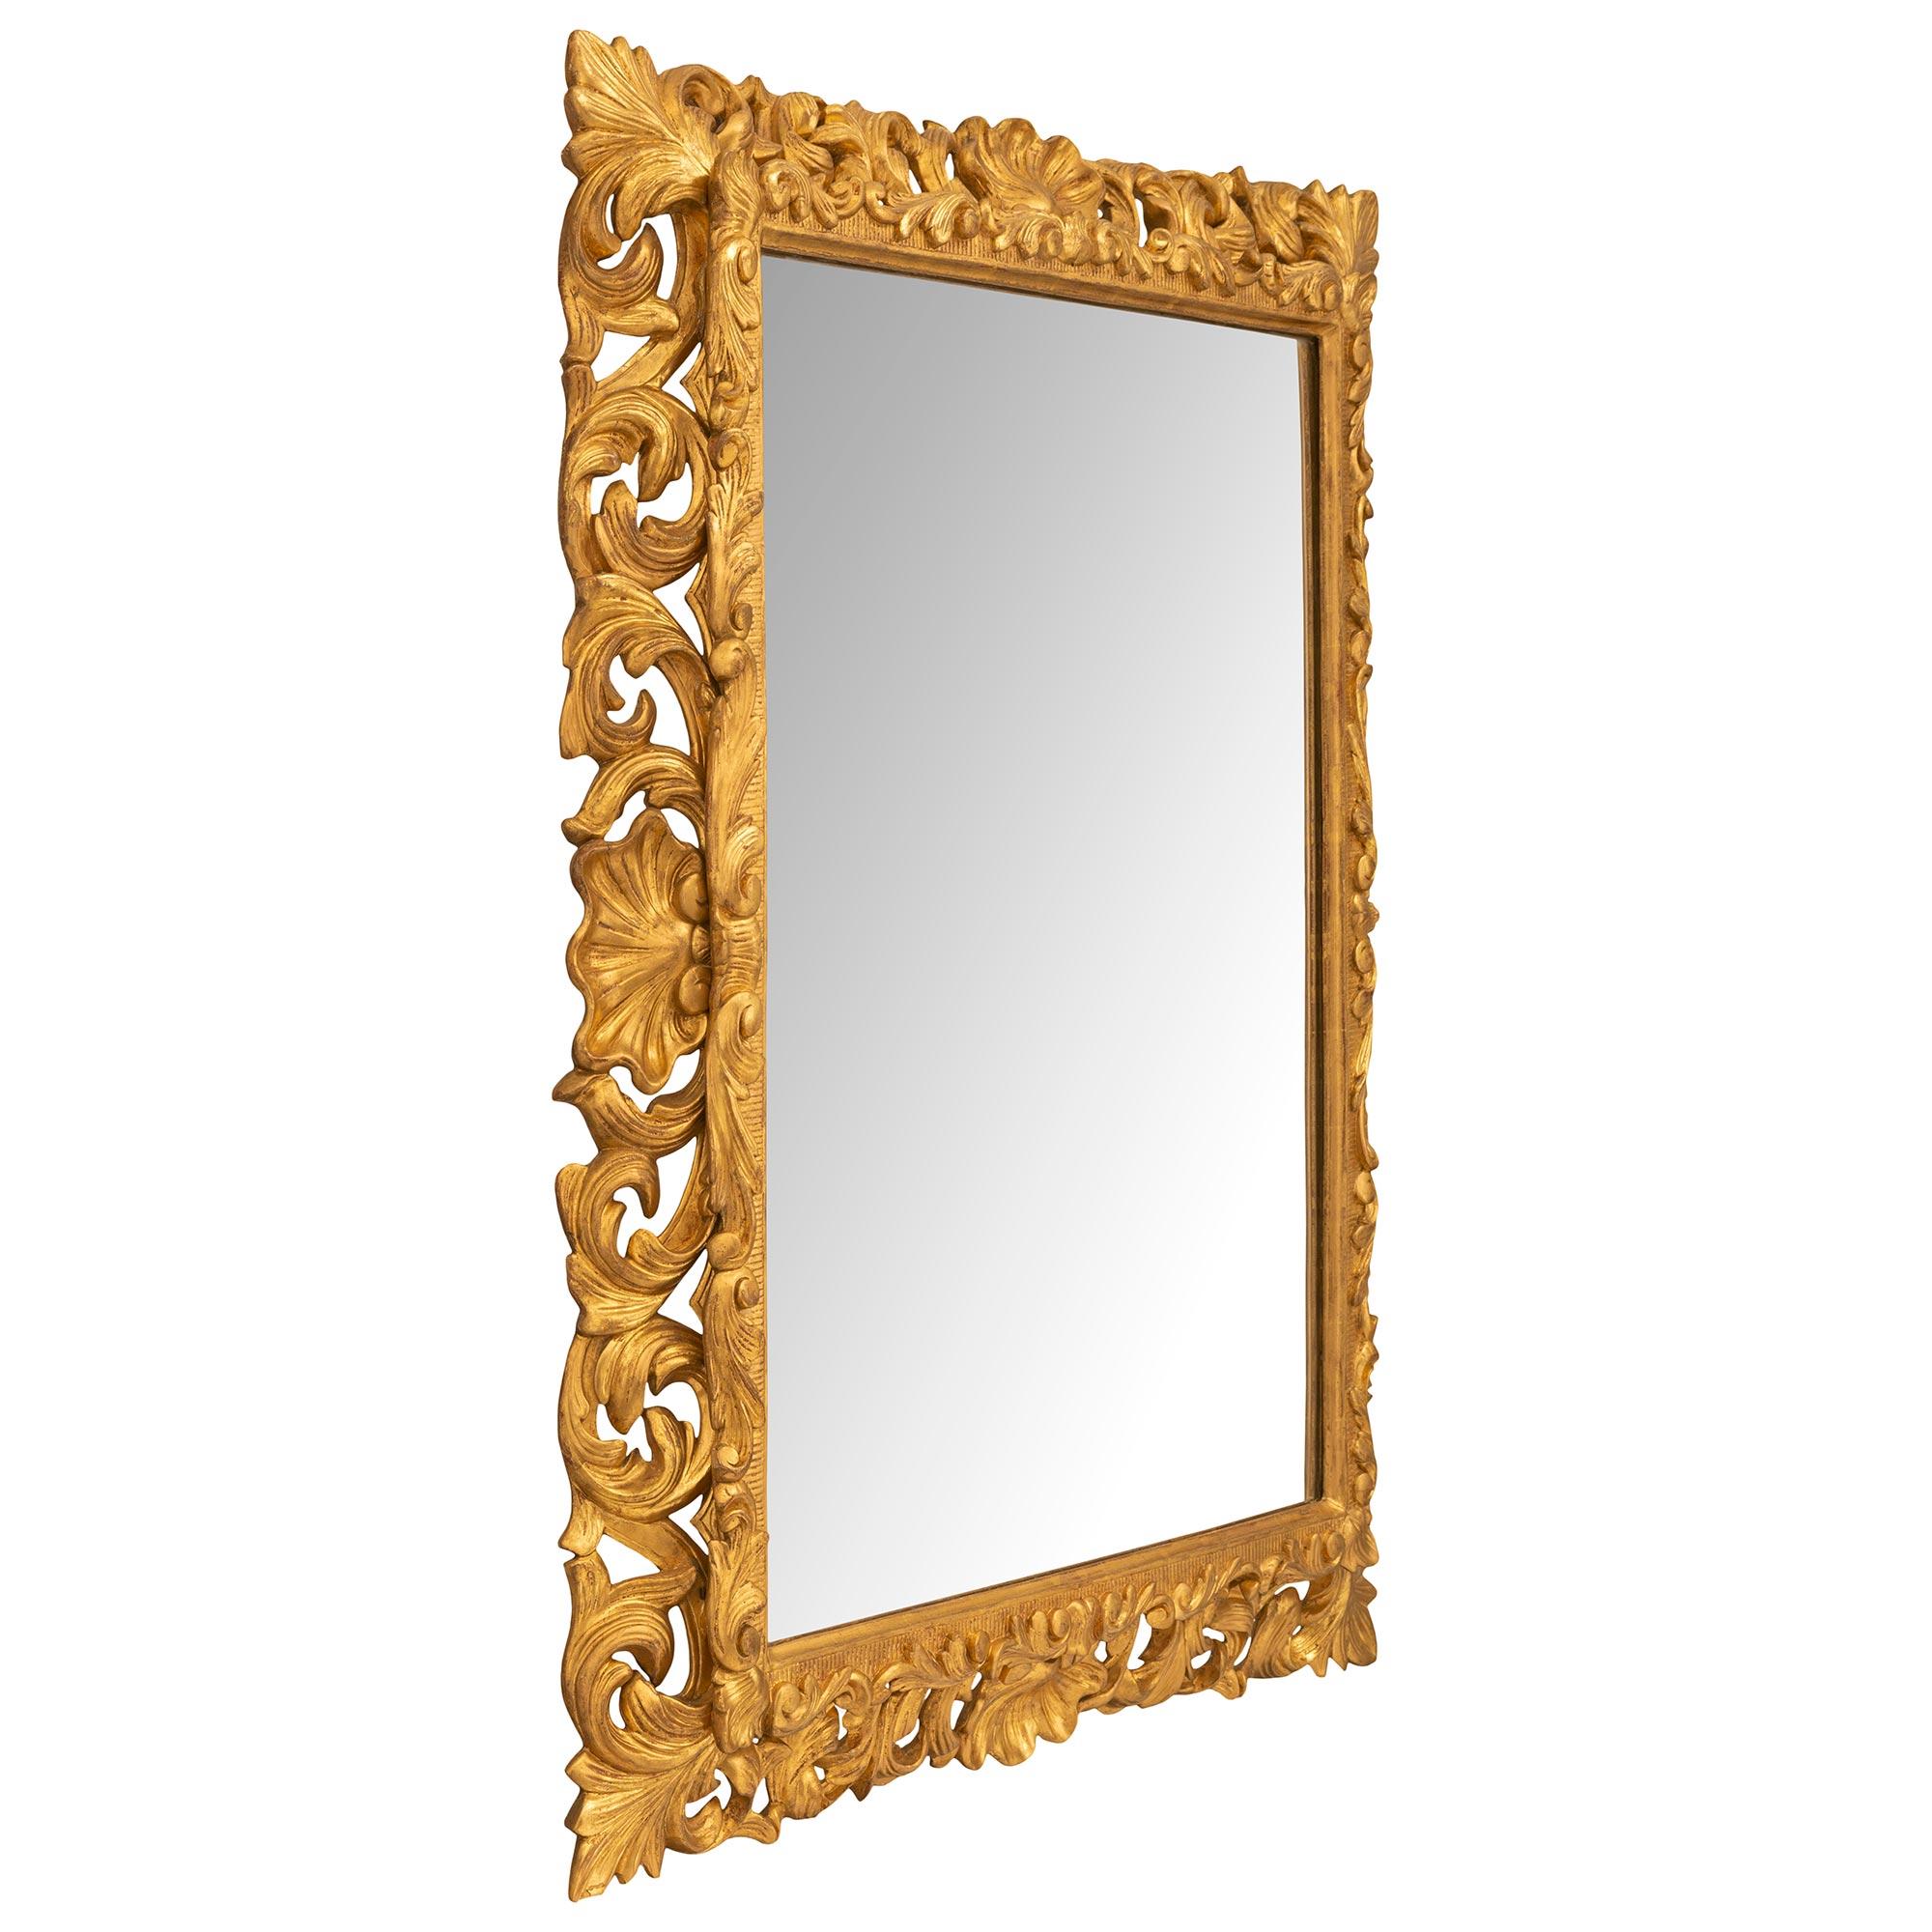 A beautiful Italian 19th century Louis XV st. giltwood mirror from Florence. The mirror retains its original mirror plate framed within a fine straight mottled border with lovely fluted designs. Extending throughout the frame are stunning pierced